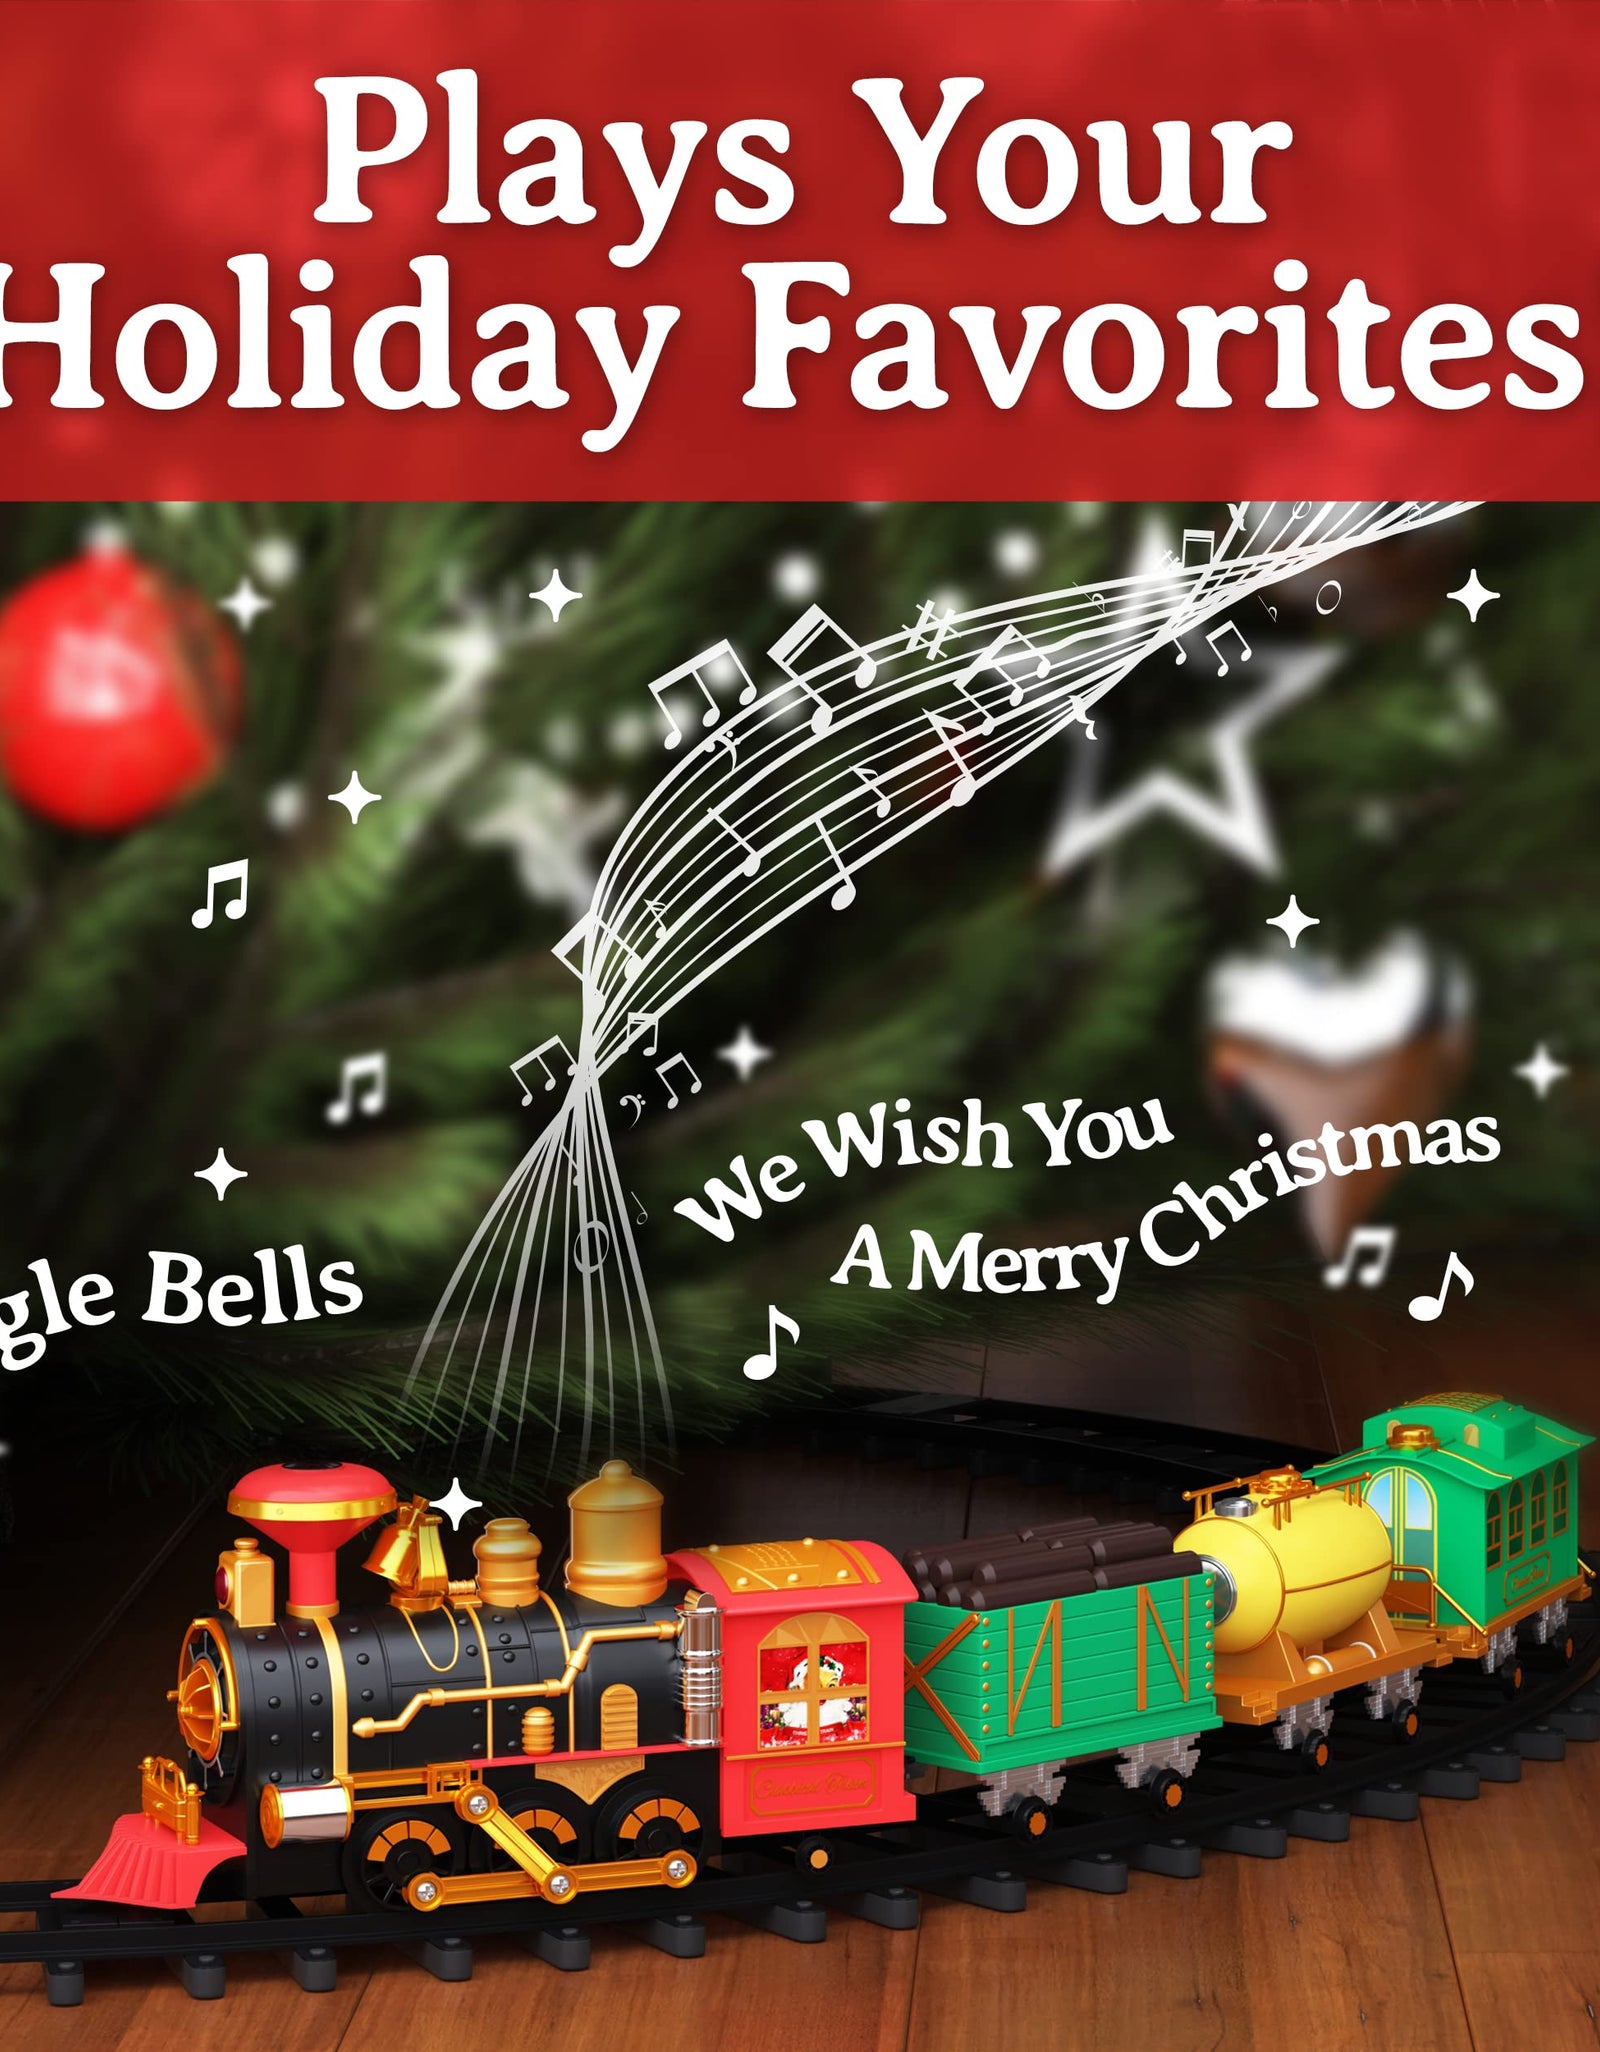 Christmas Steam Train Toy - Electric Train Set for Around Christmas Tree and Kids with Real Smoke, Music, & Lights Xmas Trains